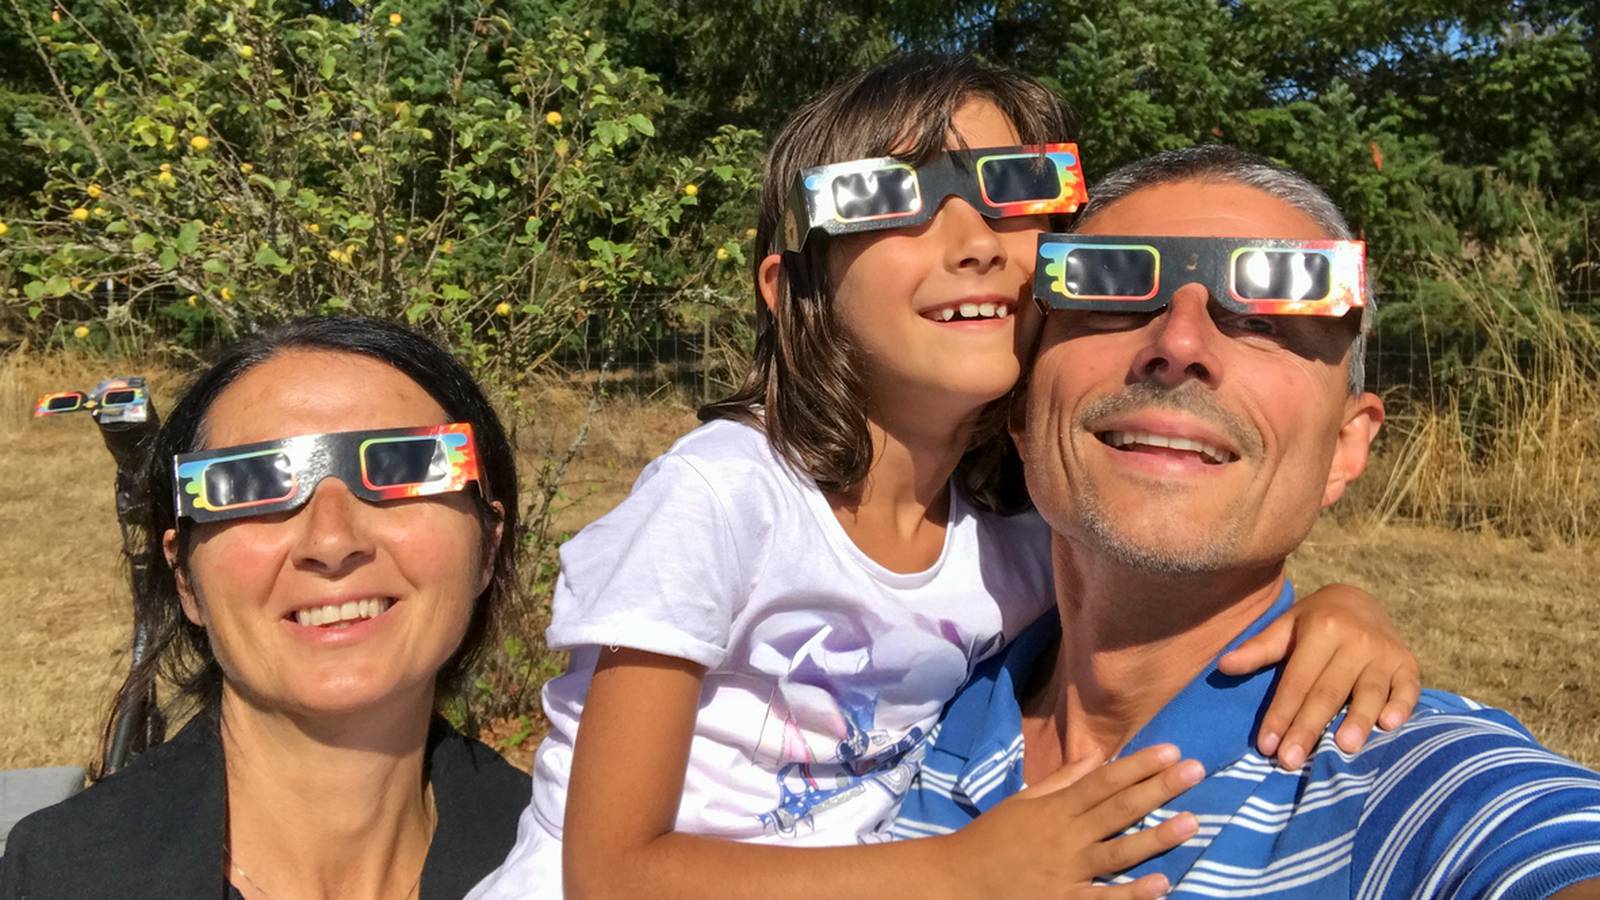 Solar eclipse 2024 When should I put on my eclipse glasses? WSBTV